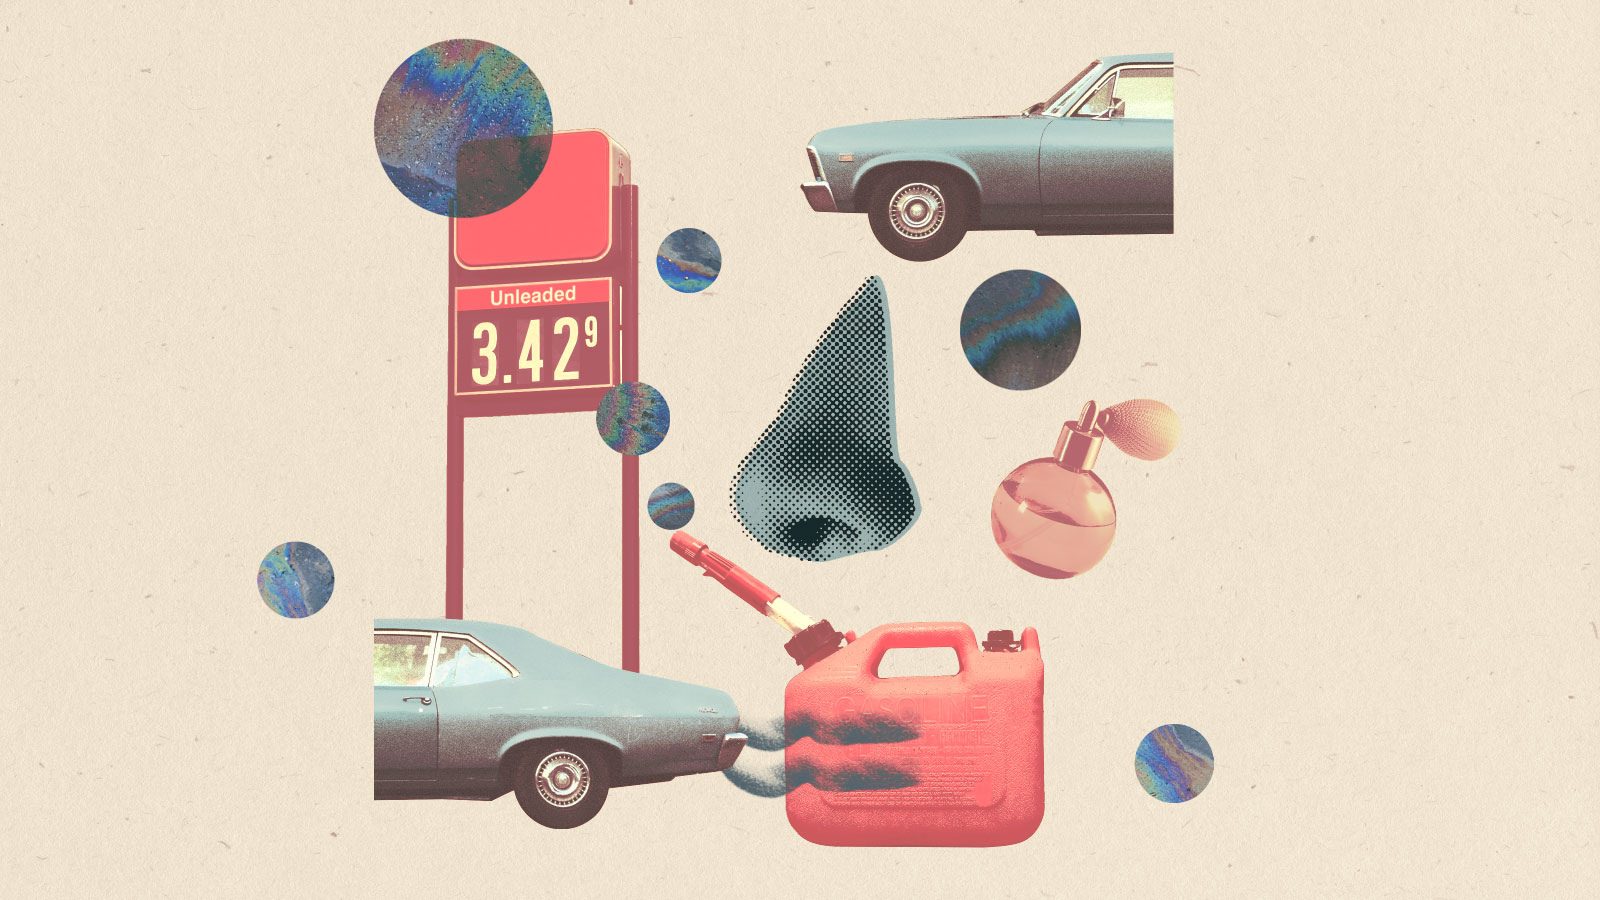 Collage: circles of oil slicks, a gas station sign, a vintage car cut in half, a nose, a gas canister, and a perfume bottle